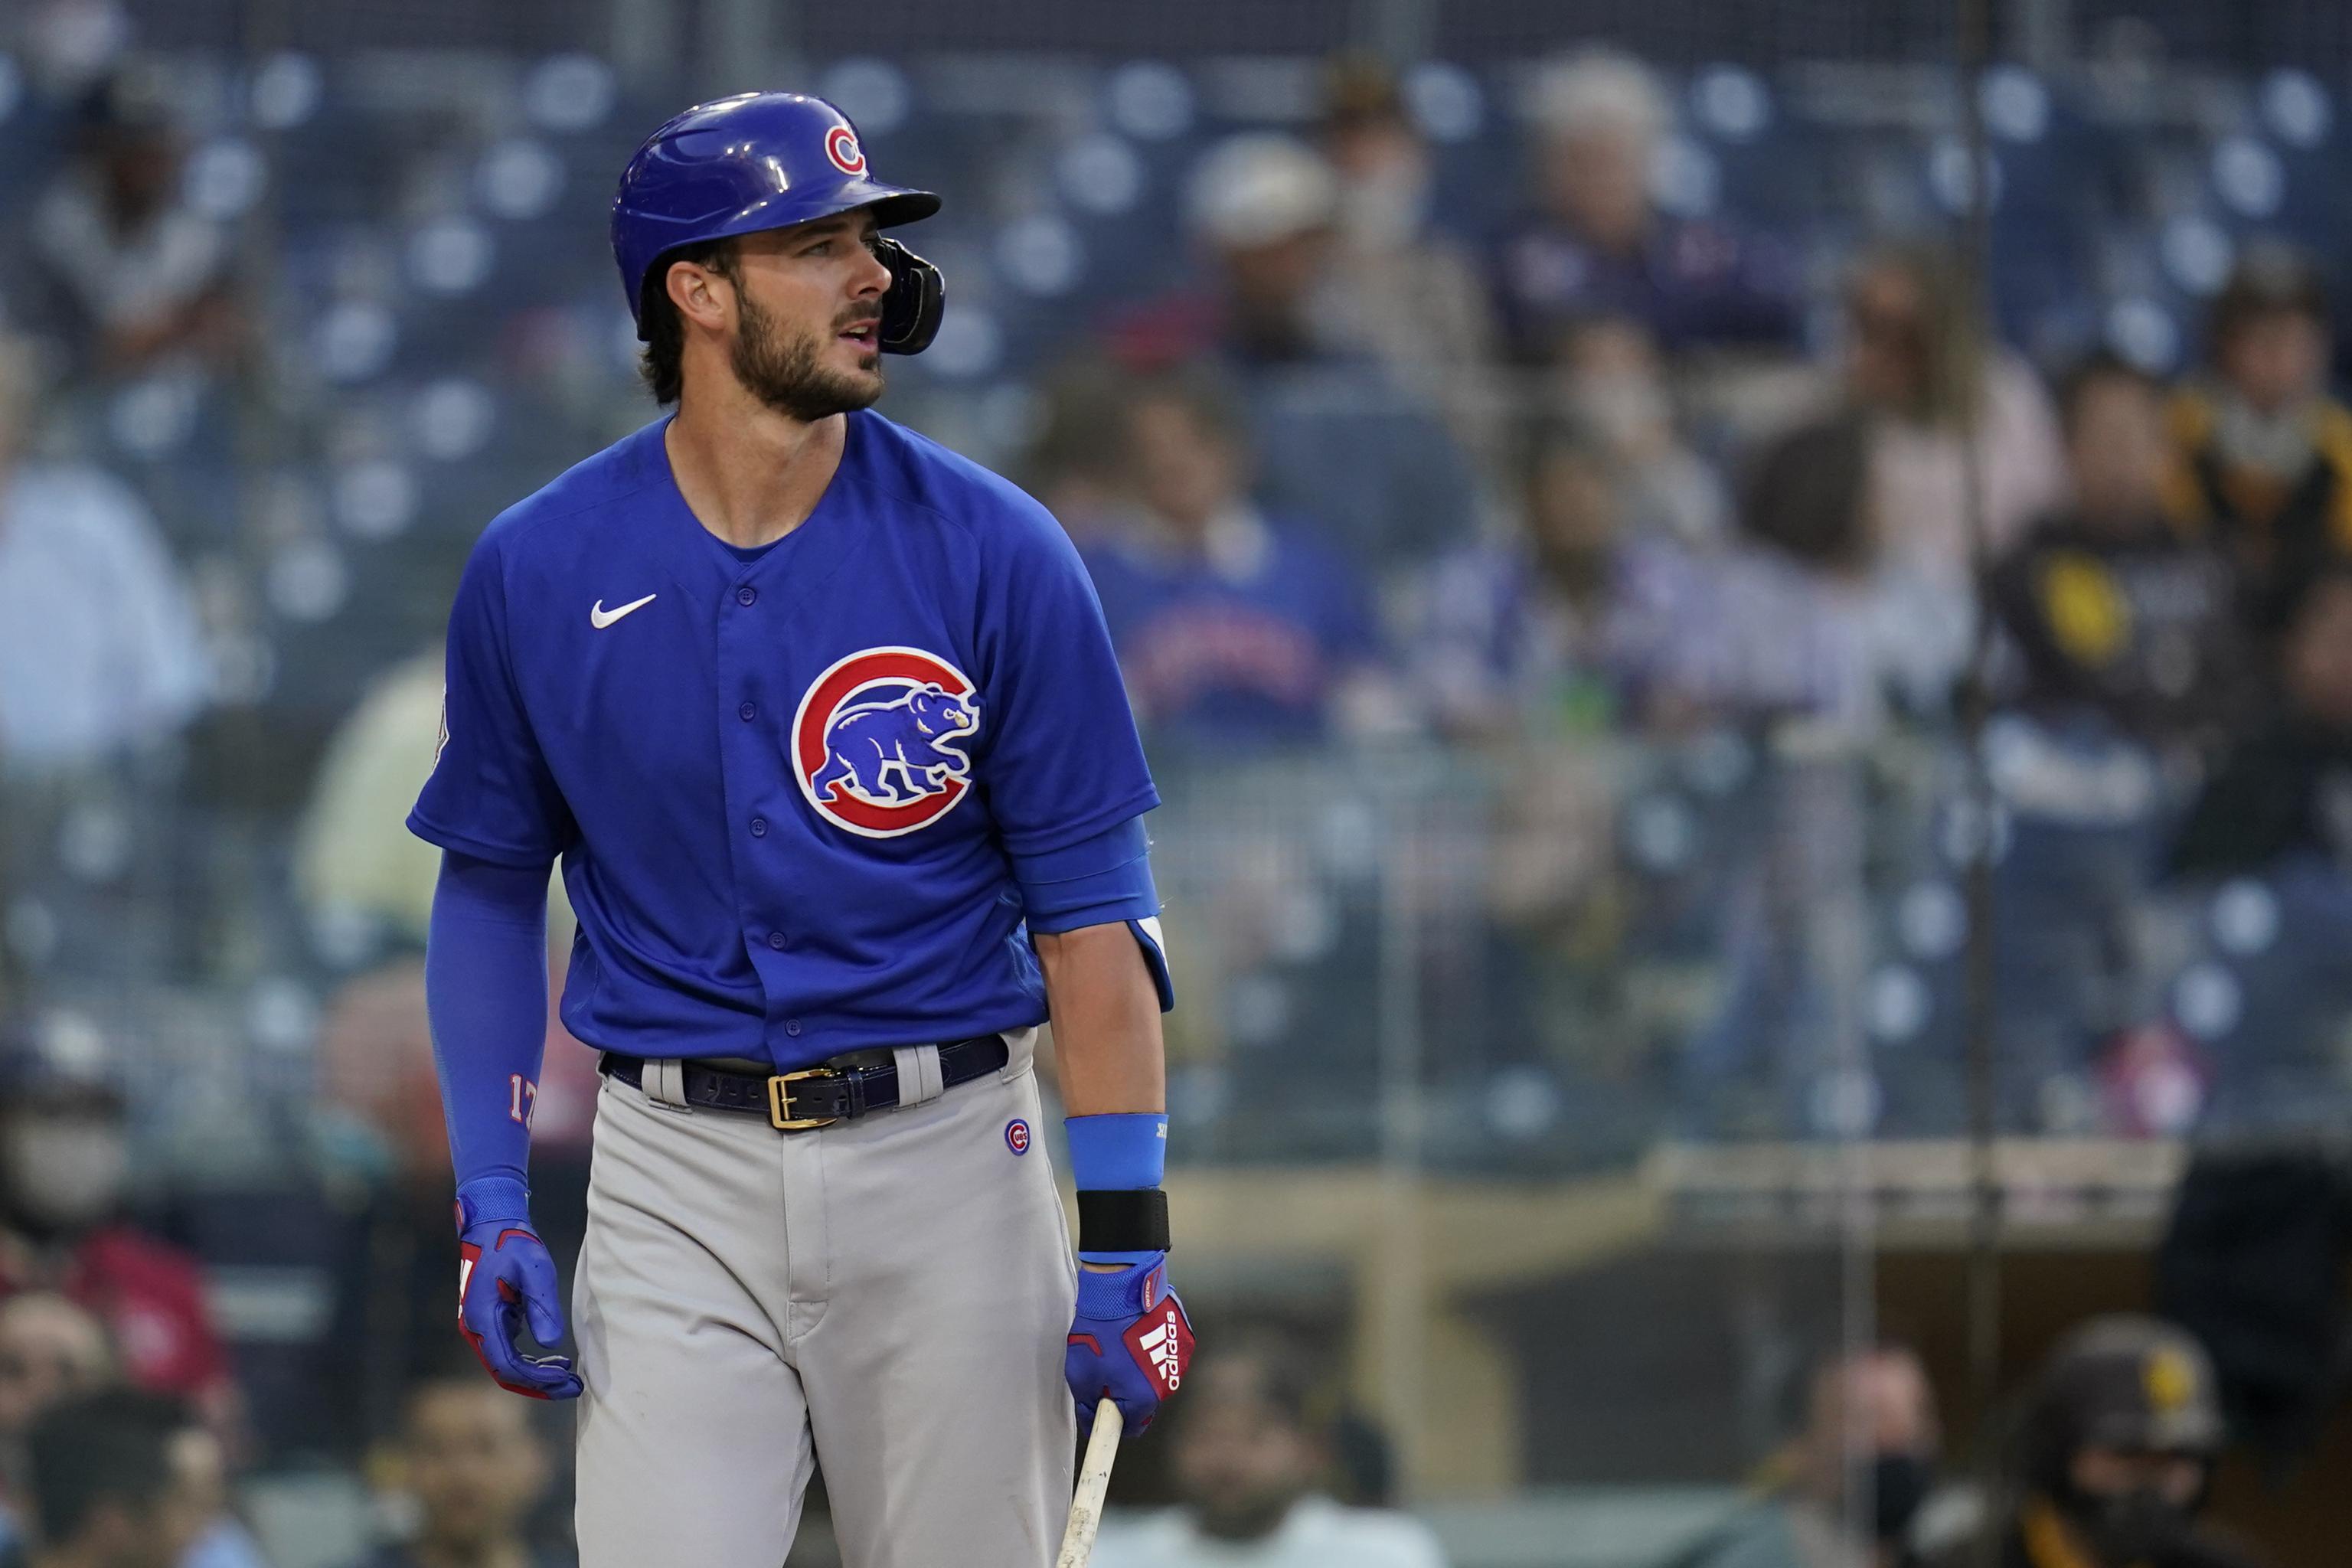 Trade chatter can't take away how Bryant feels about playing for Cubs